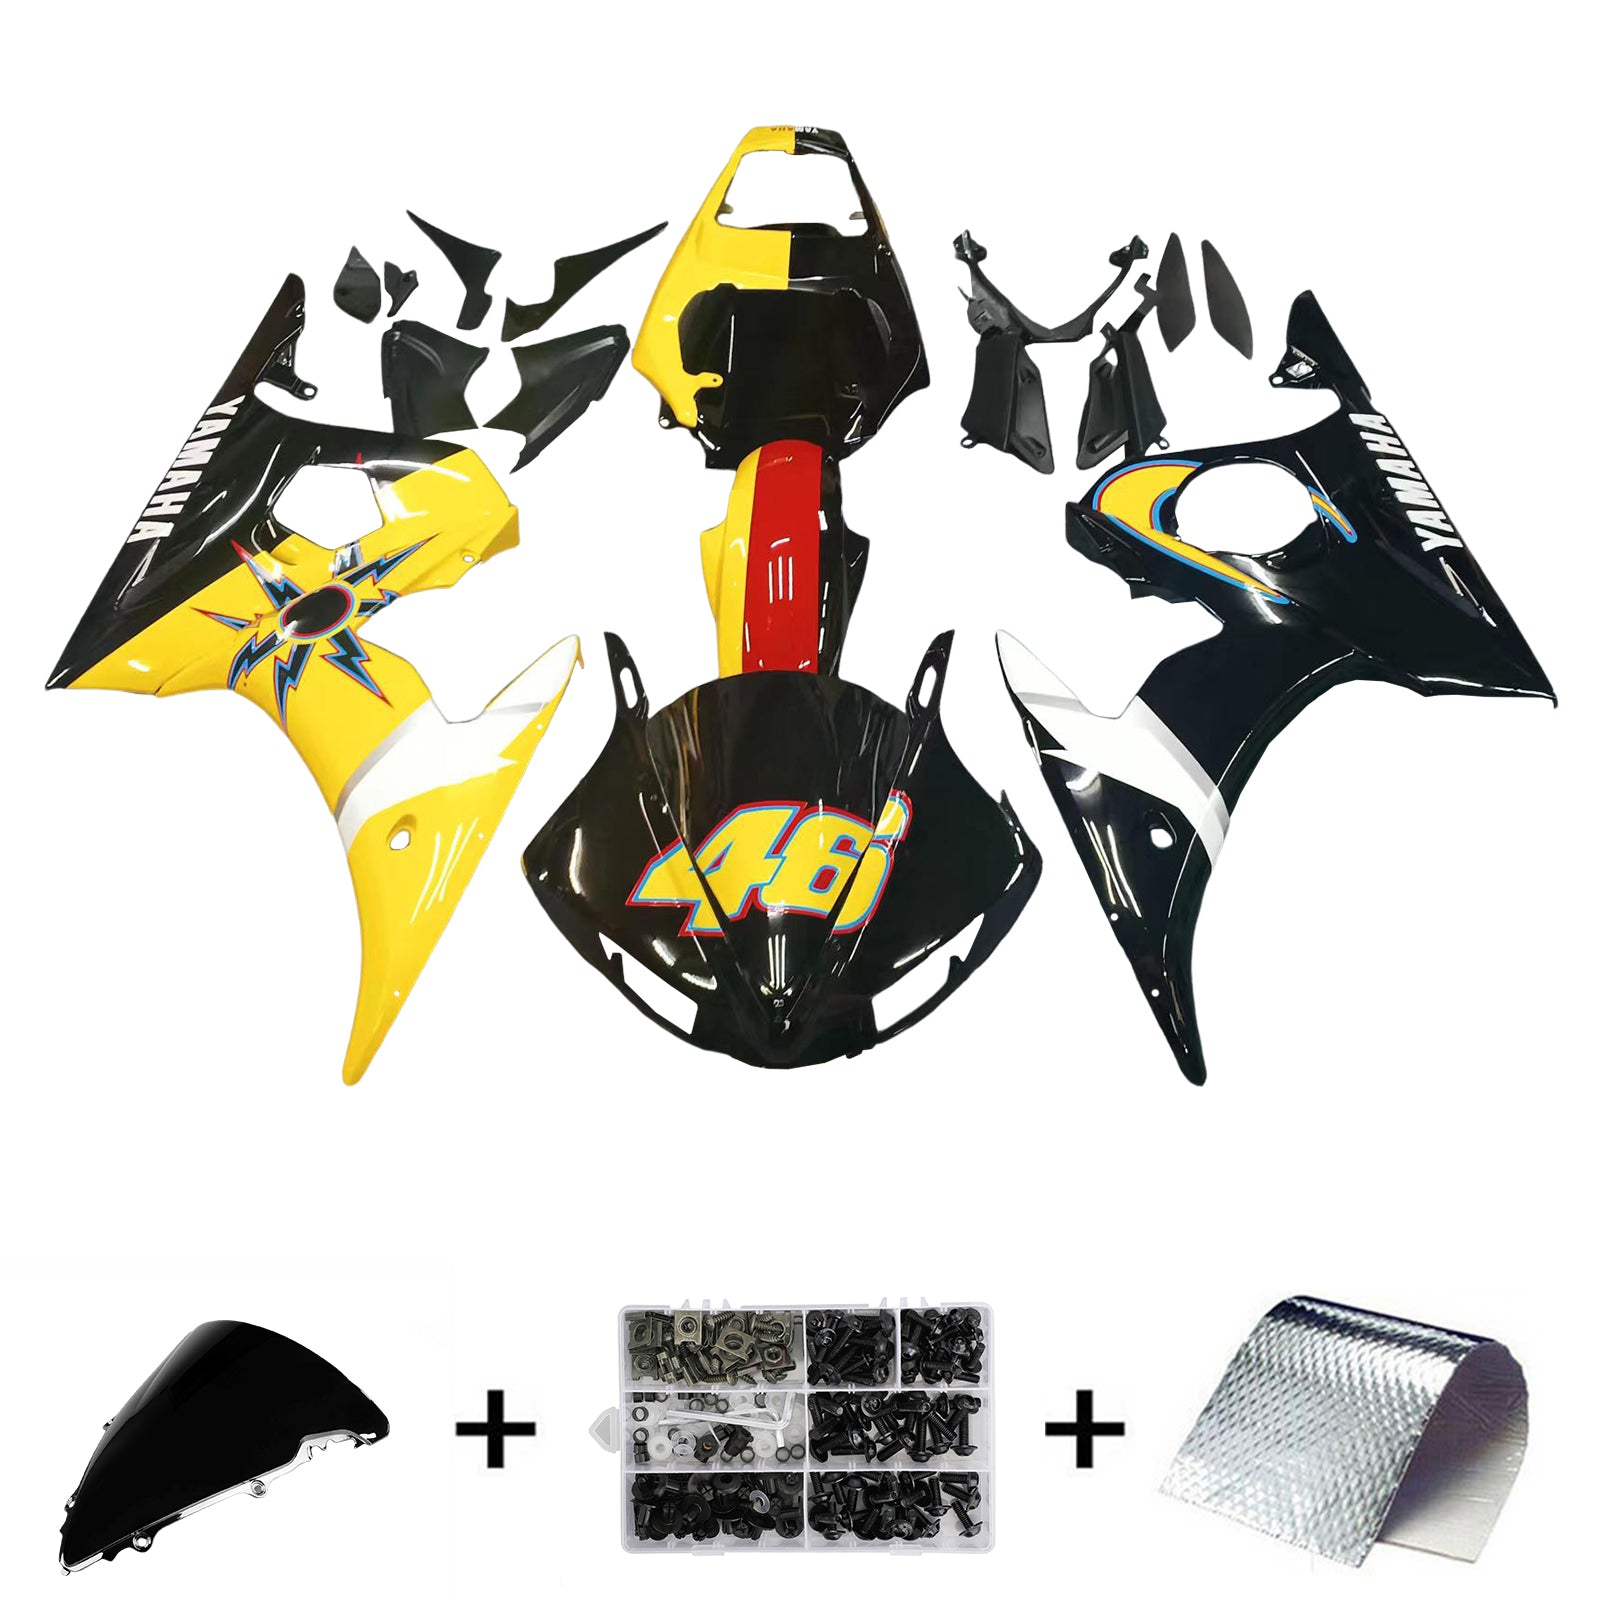 Amotopart 2003-2004 Yamaha R6 & 2006-2009 YZF R6S Fairing Multi Color Number 46 Kit